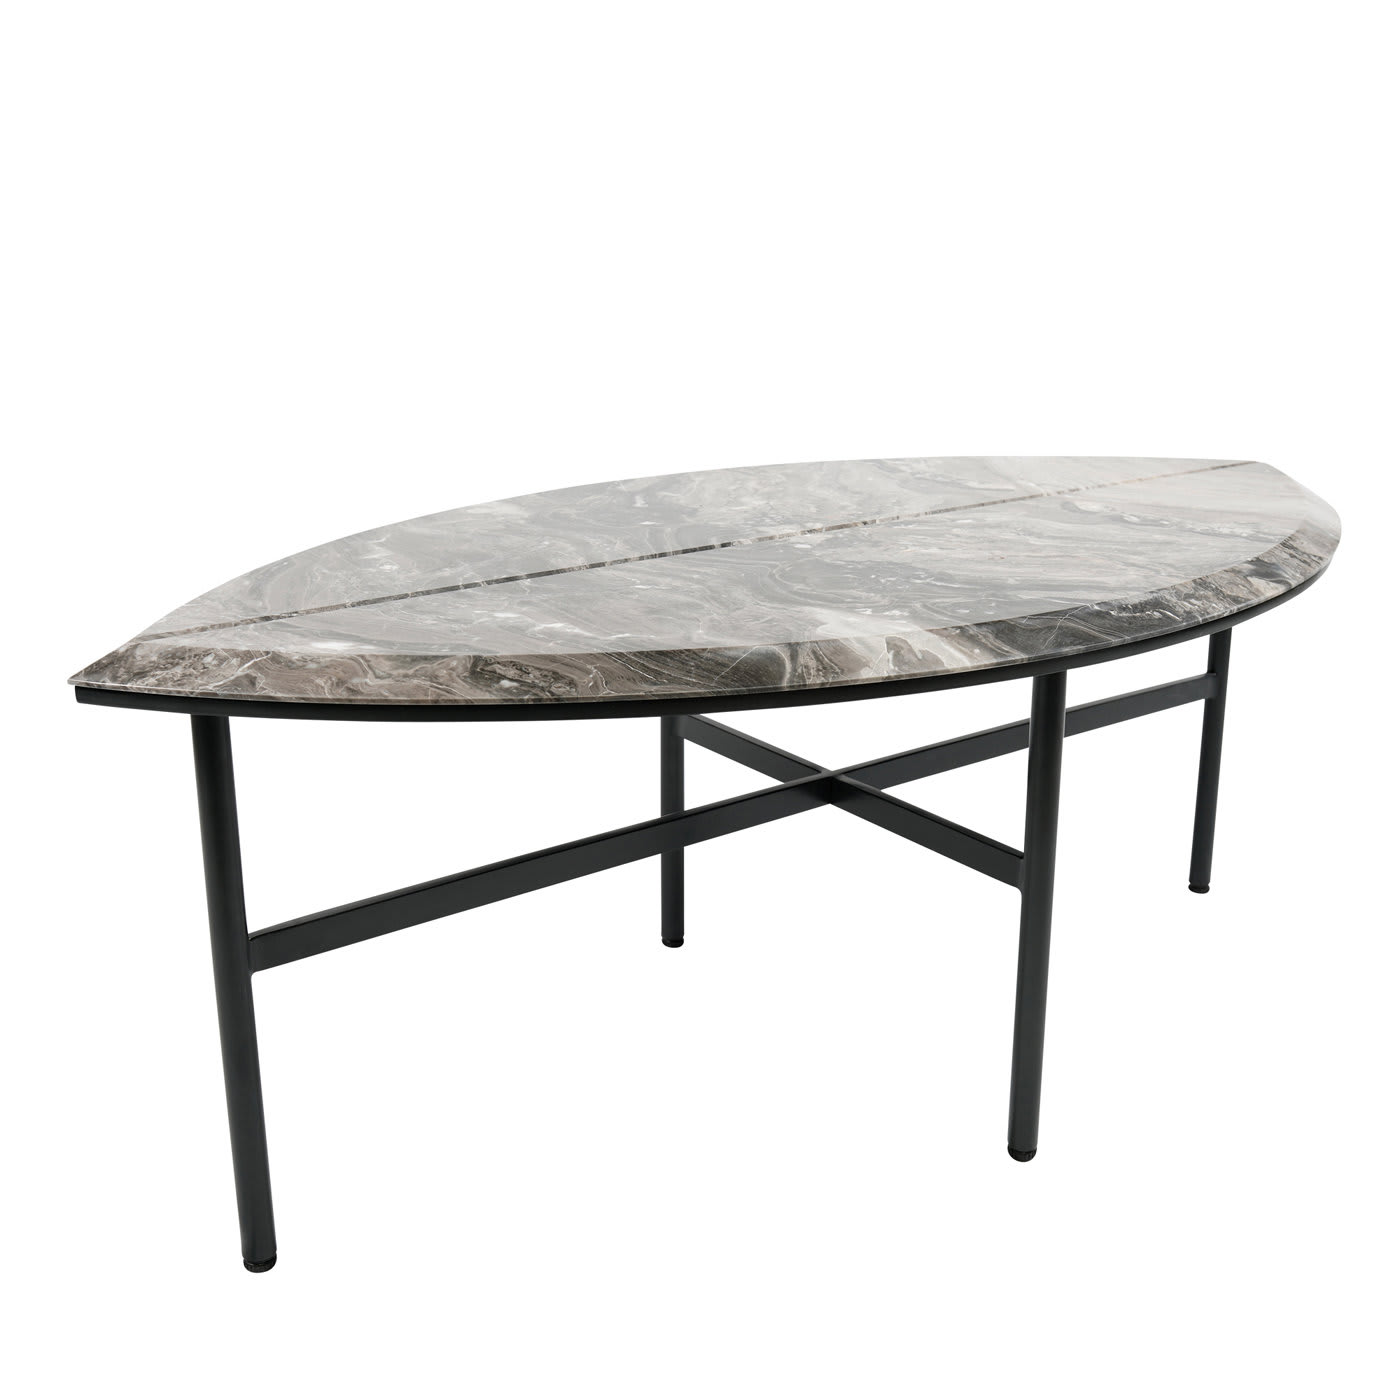 Book One coffee table - Secolo